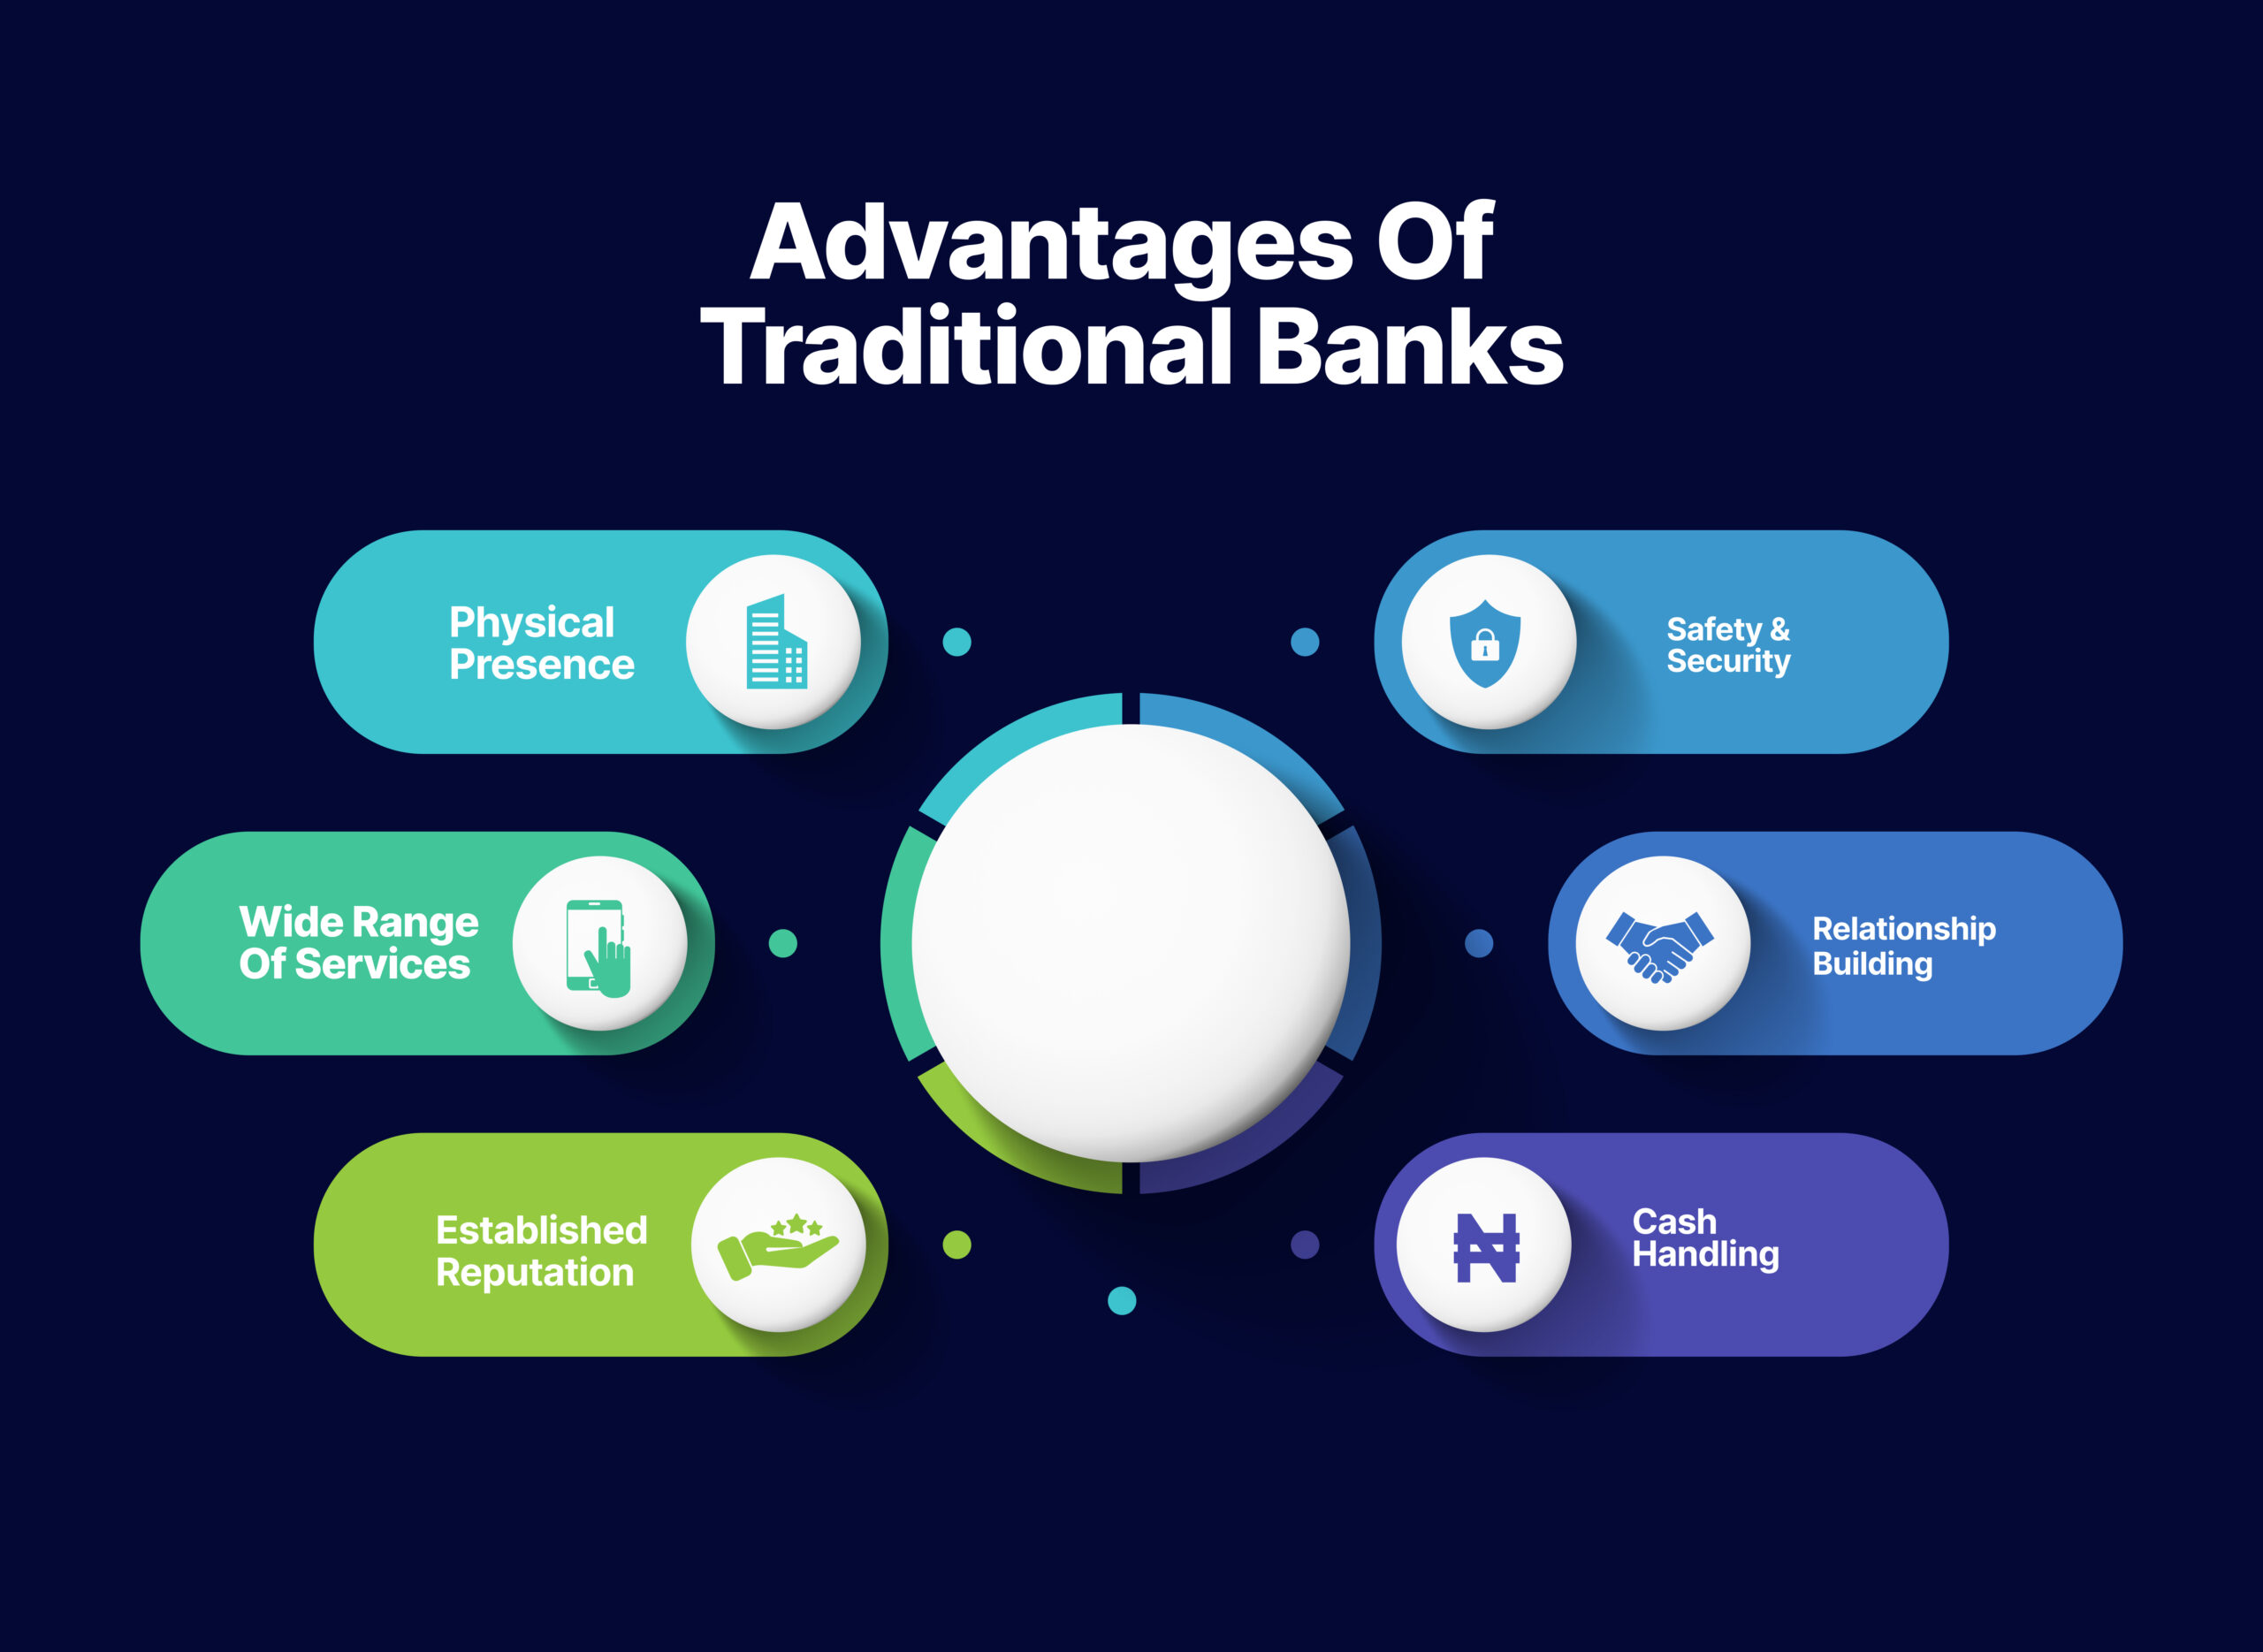 Advantages of Traditional Banks